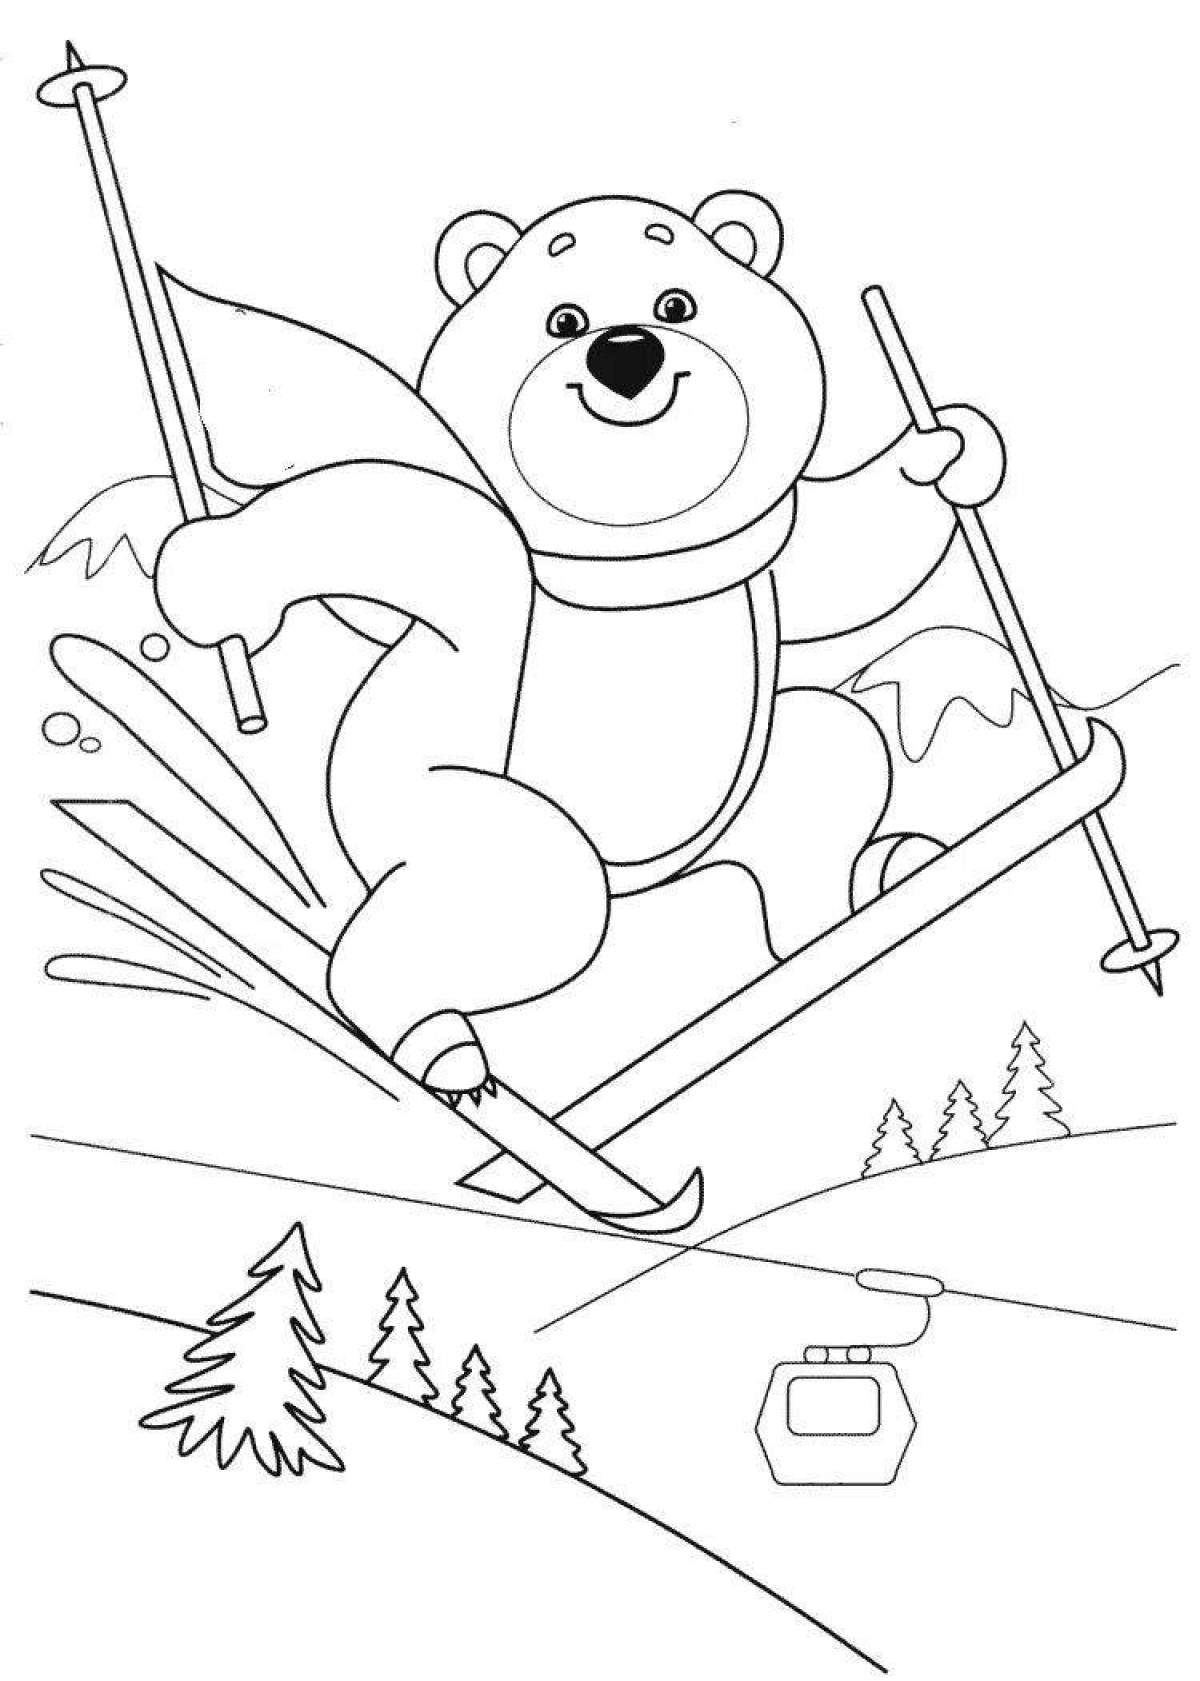 Coloring book sparkling olympic winter sports